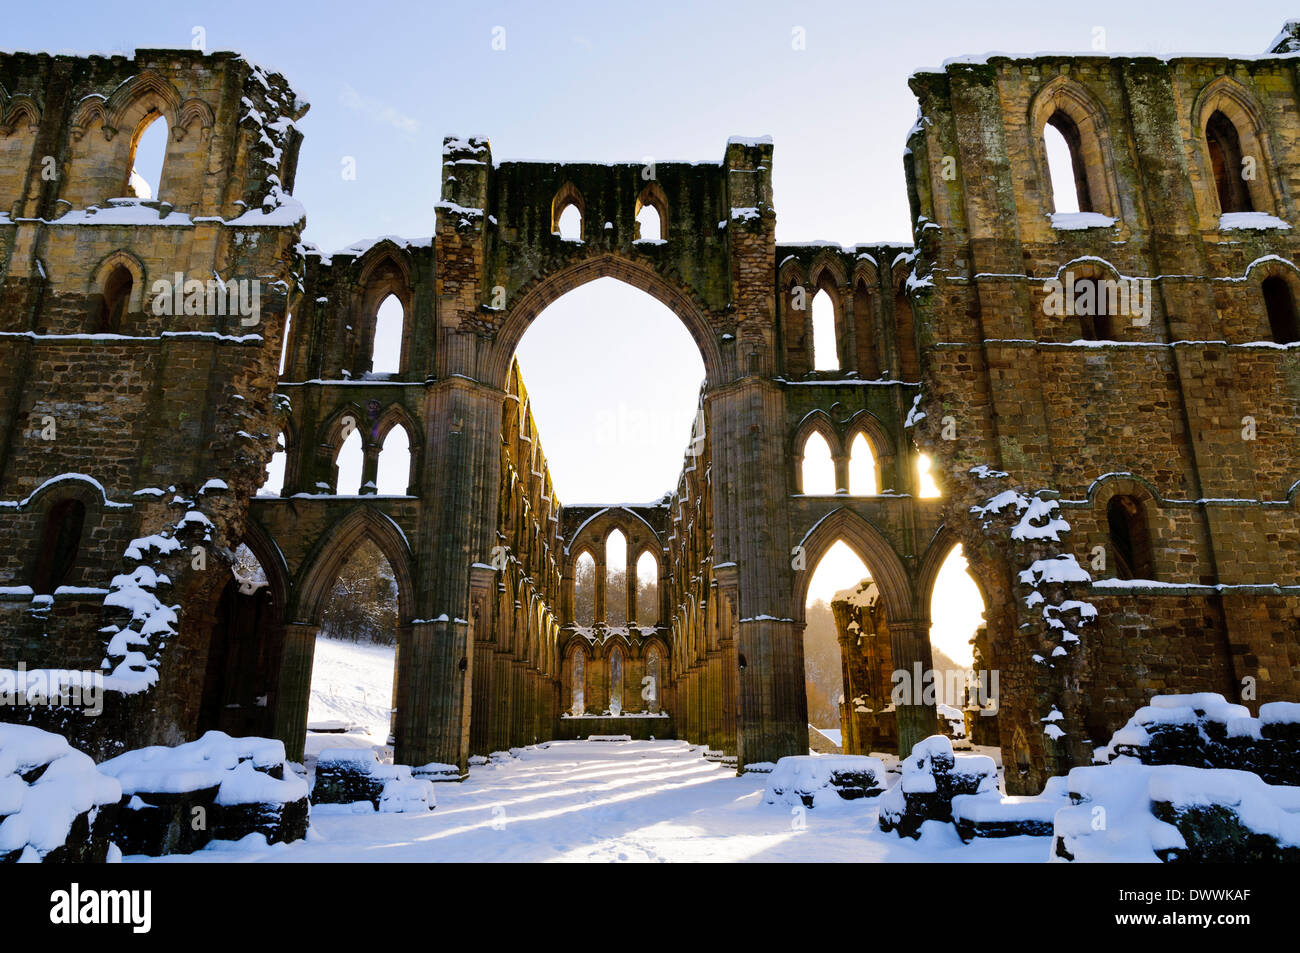 Sunlight shining through the arched windows in the ruins of Rievaulx Abbey under a  covering of snow on a bright winter's day Stock Photo